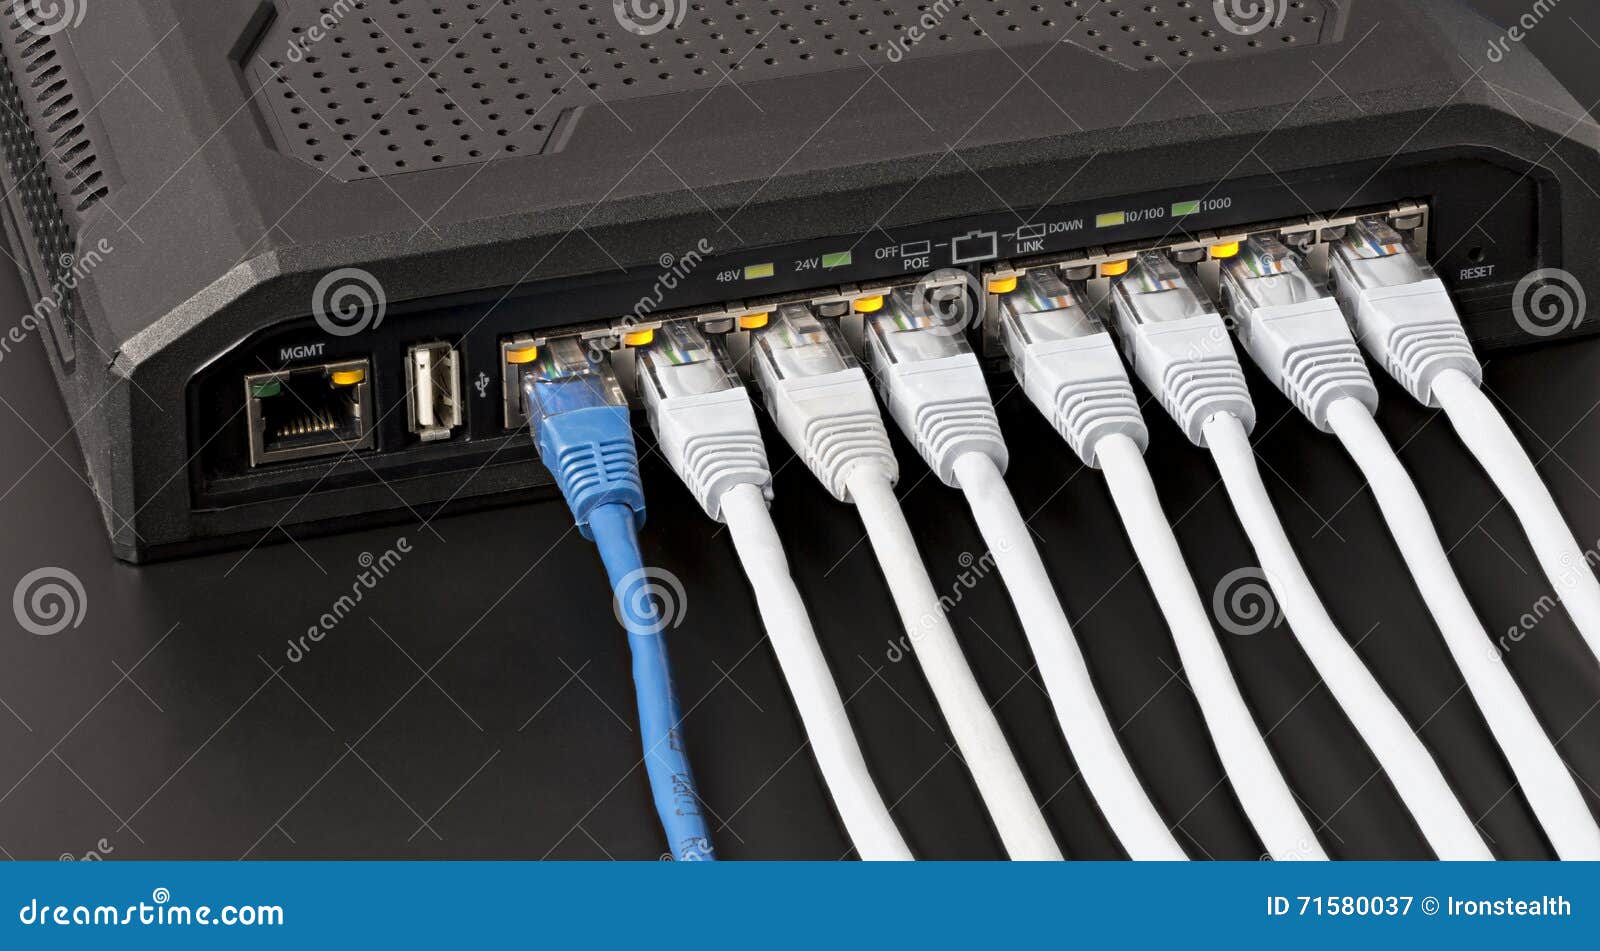 managed lan switch with 10 power over ethernet gigabit ports